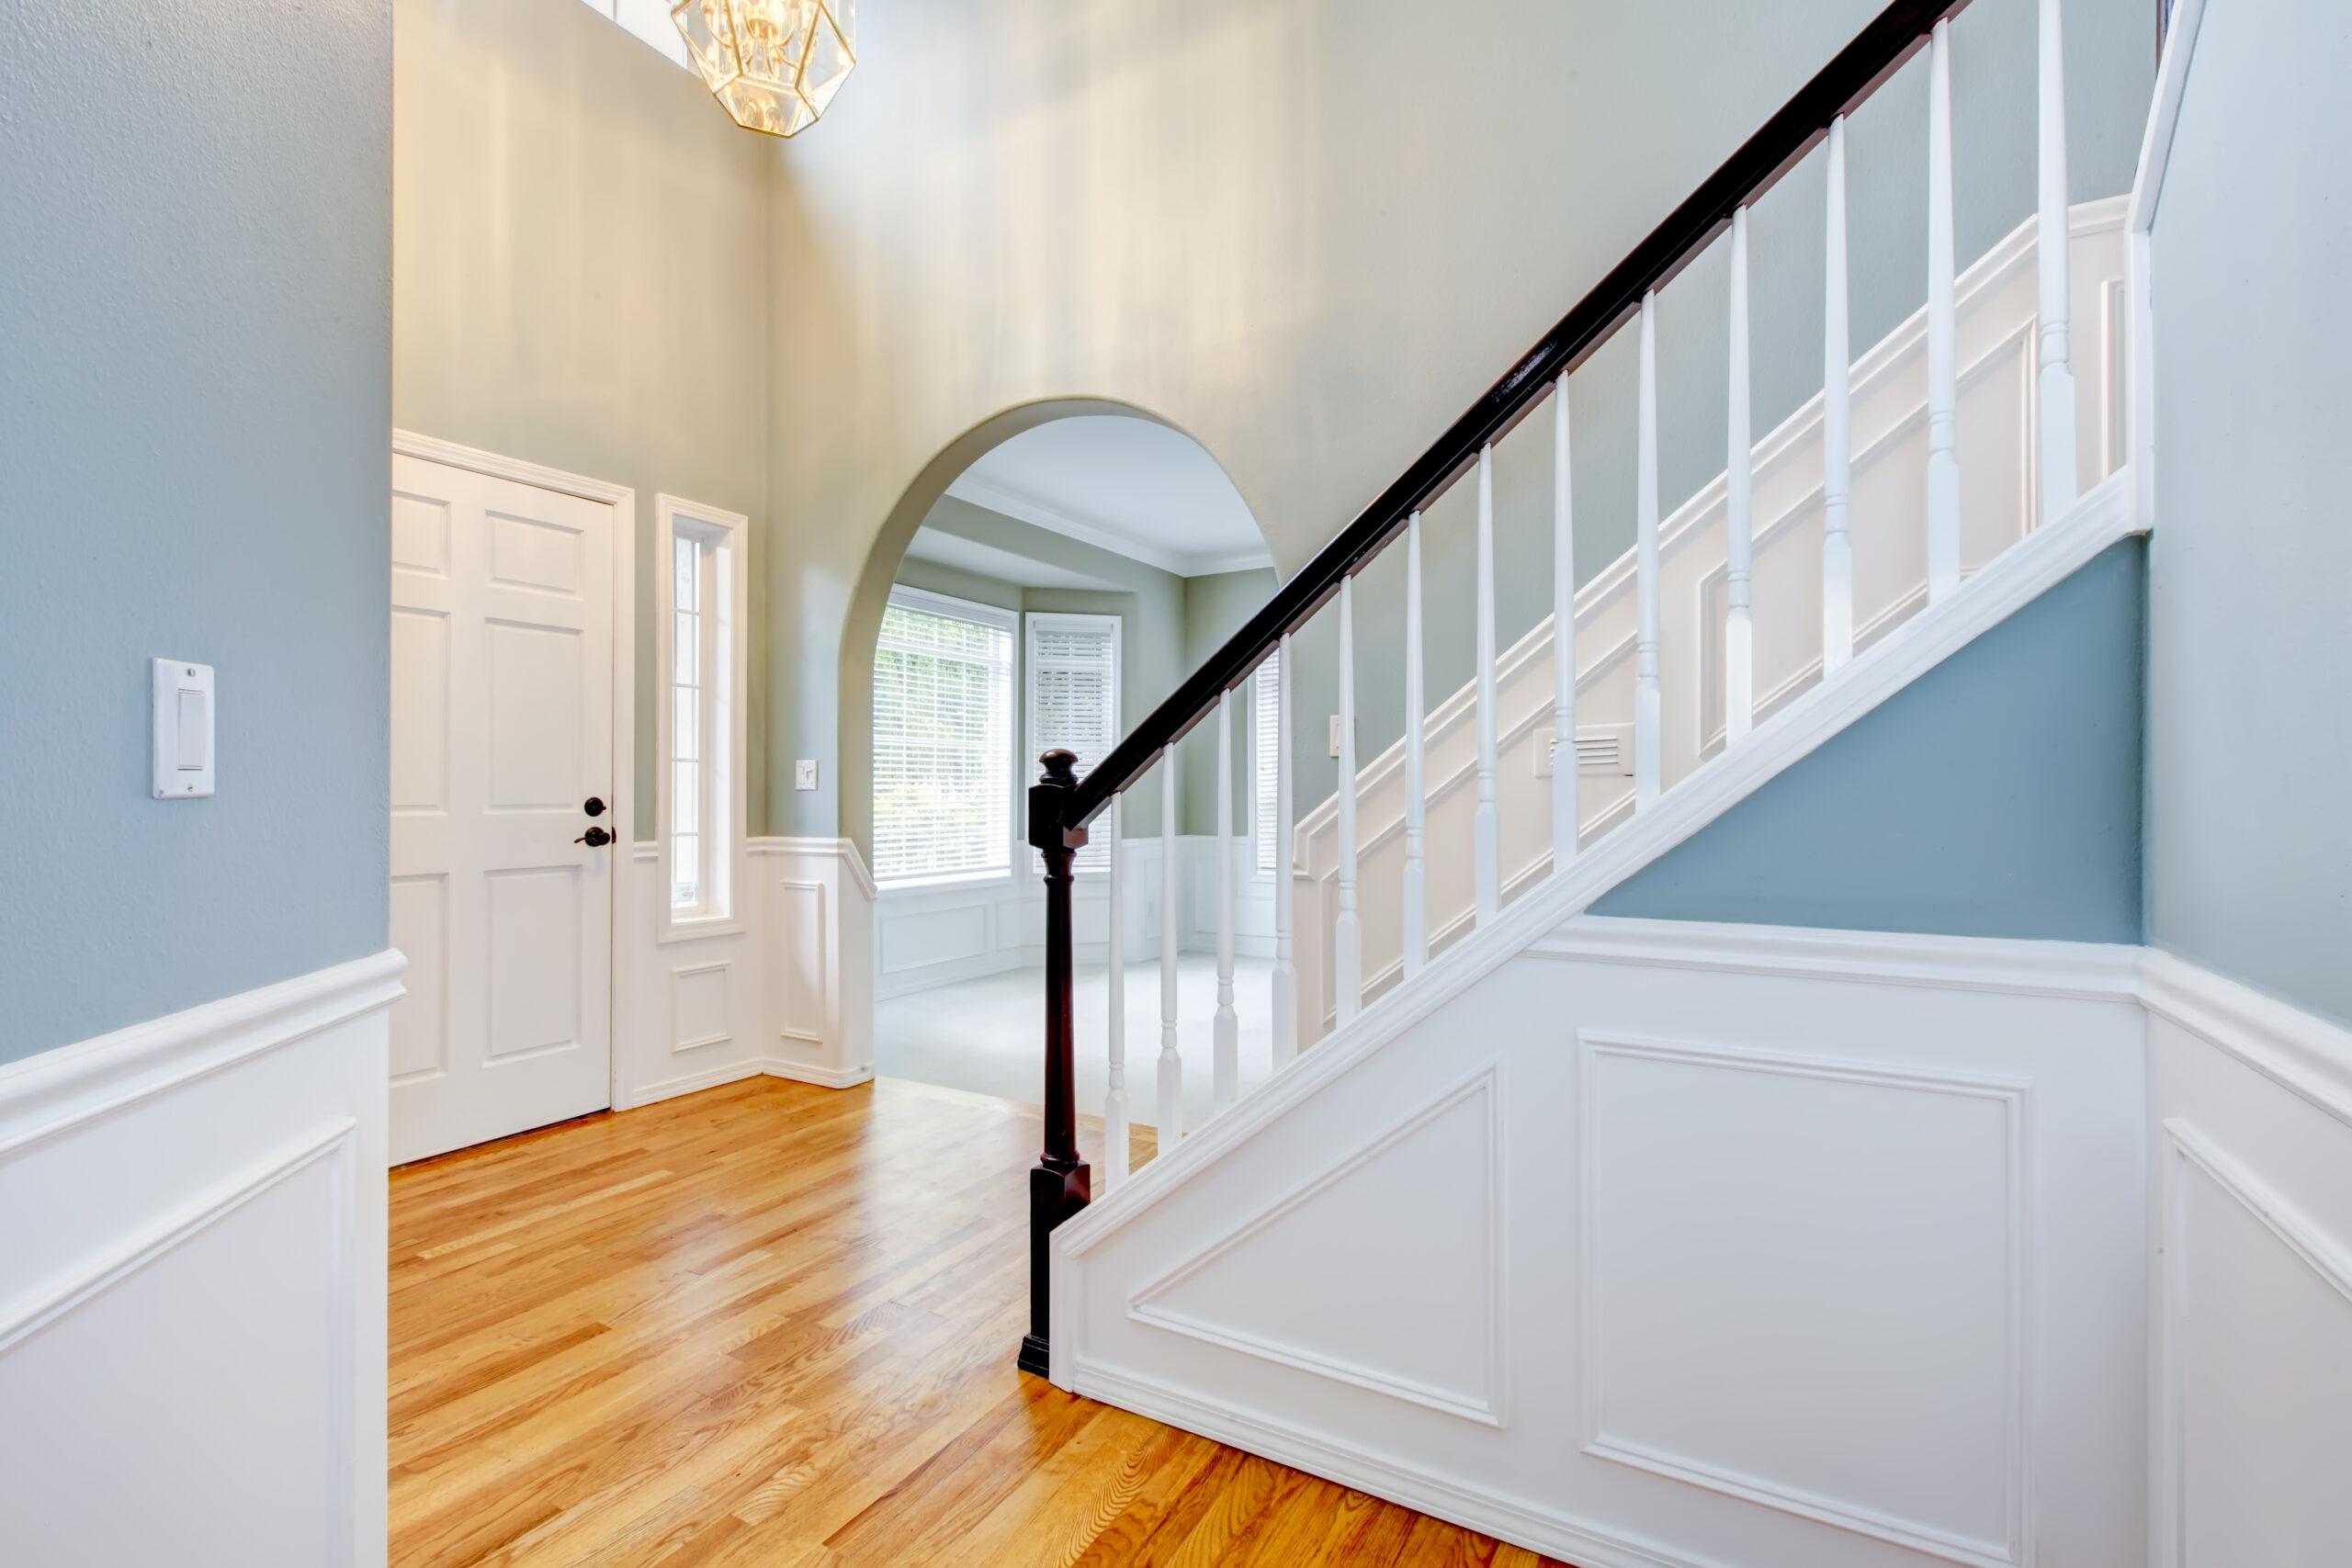 Blue luxury new entrace with white molding and staircase.